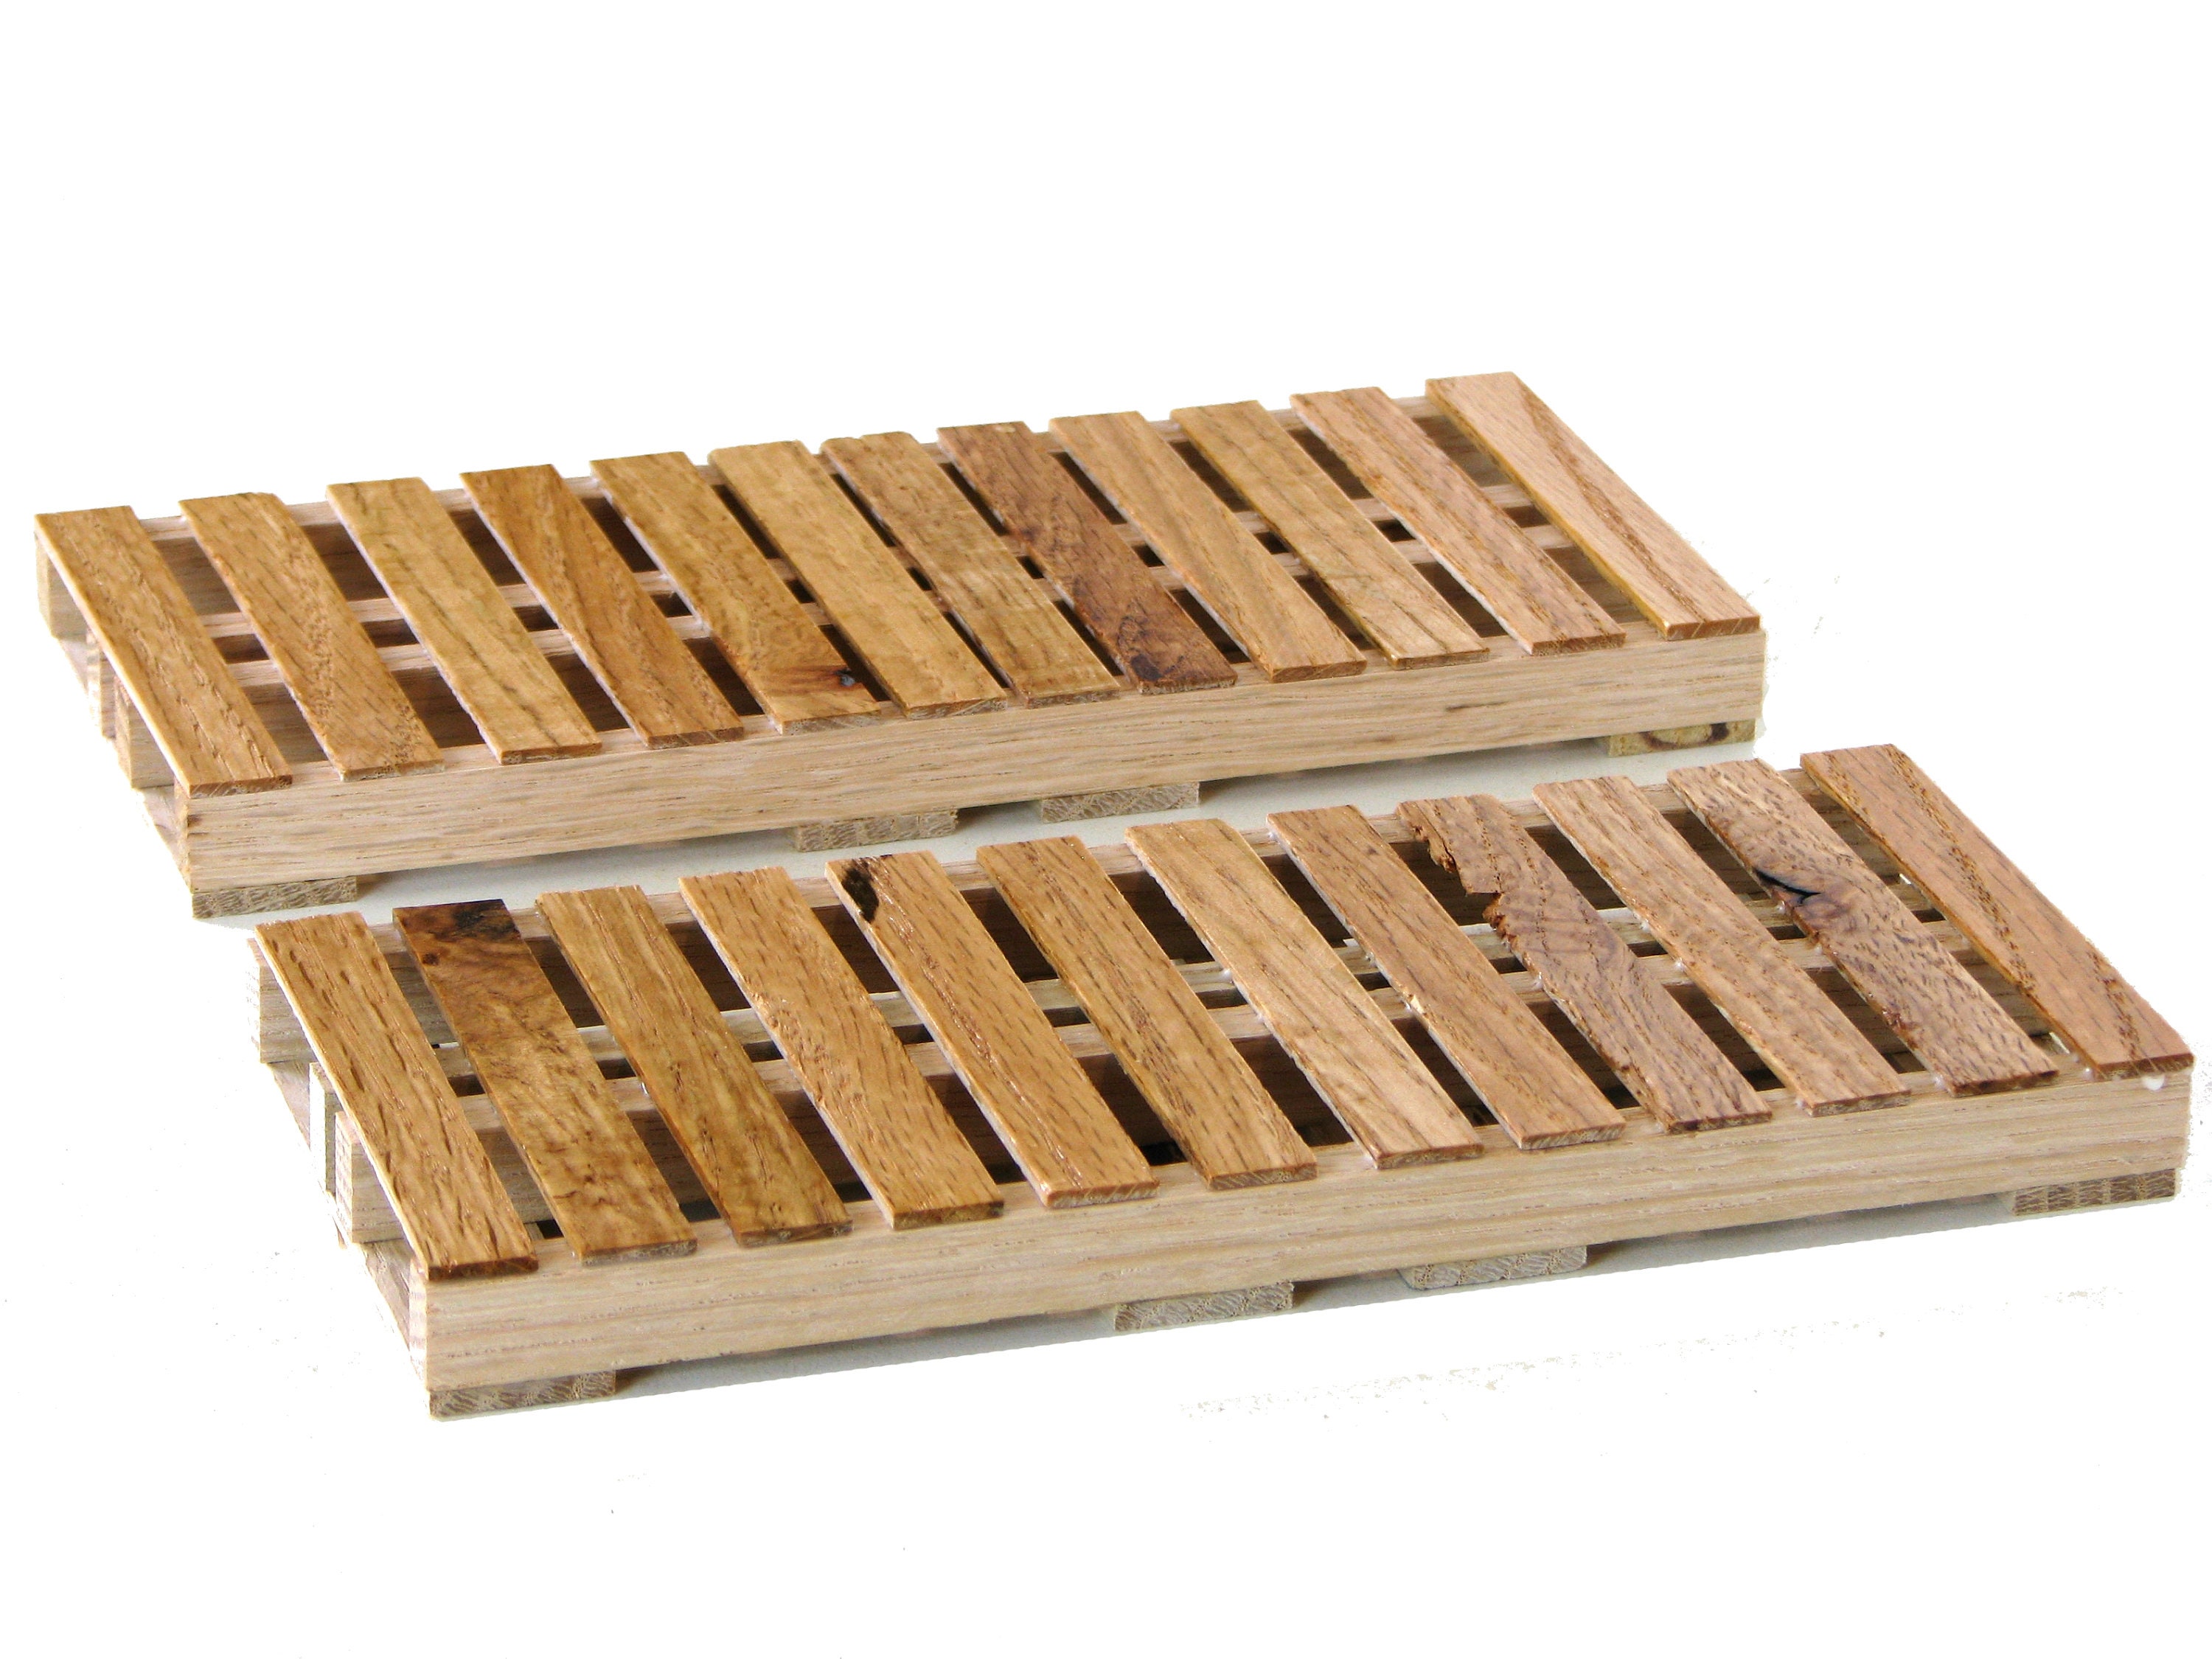 Set of 12 bookbinding pallets with oak box